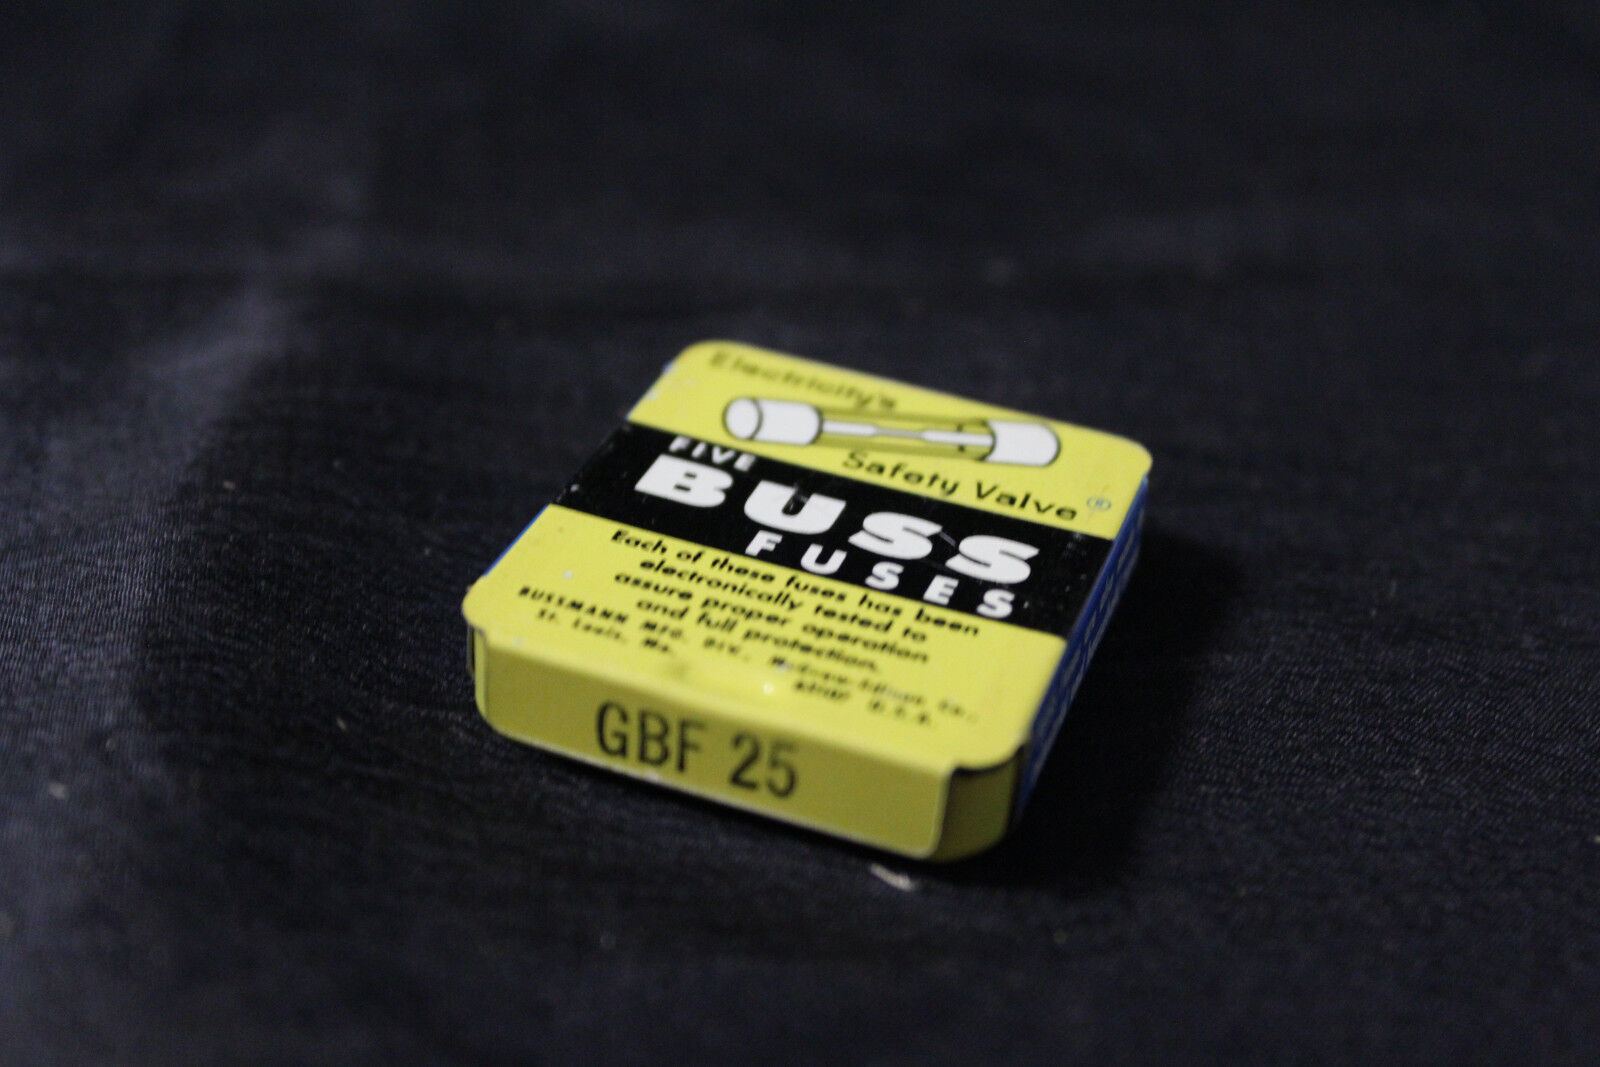 New Buss Fuse GBF 25 (5 pack) Box (C-2)